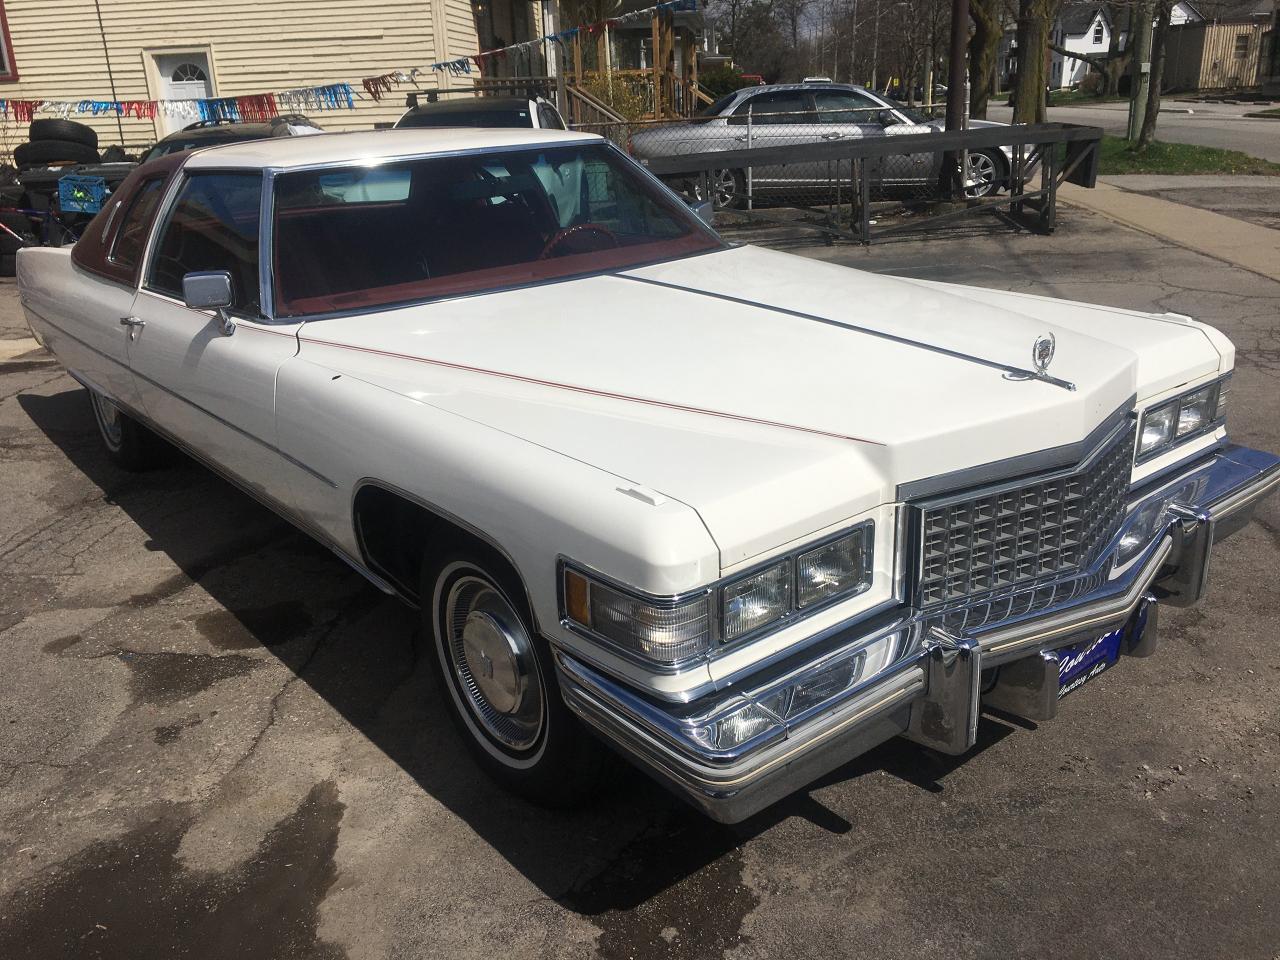 1976 Cadillac Coupe De Ville Documented Original Mileage (Stored 22 Years) - Photo #2